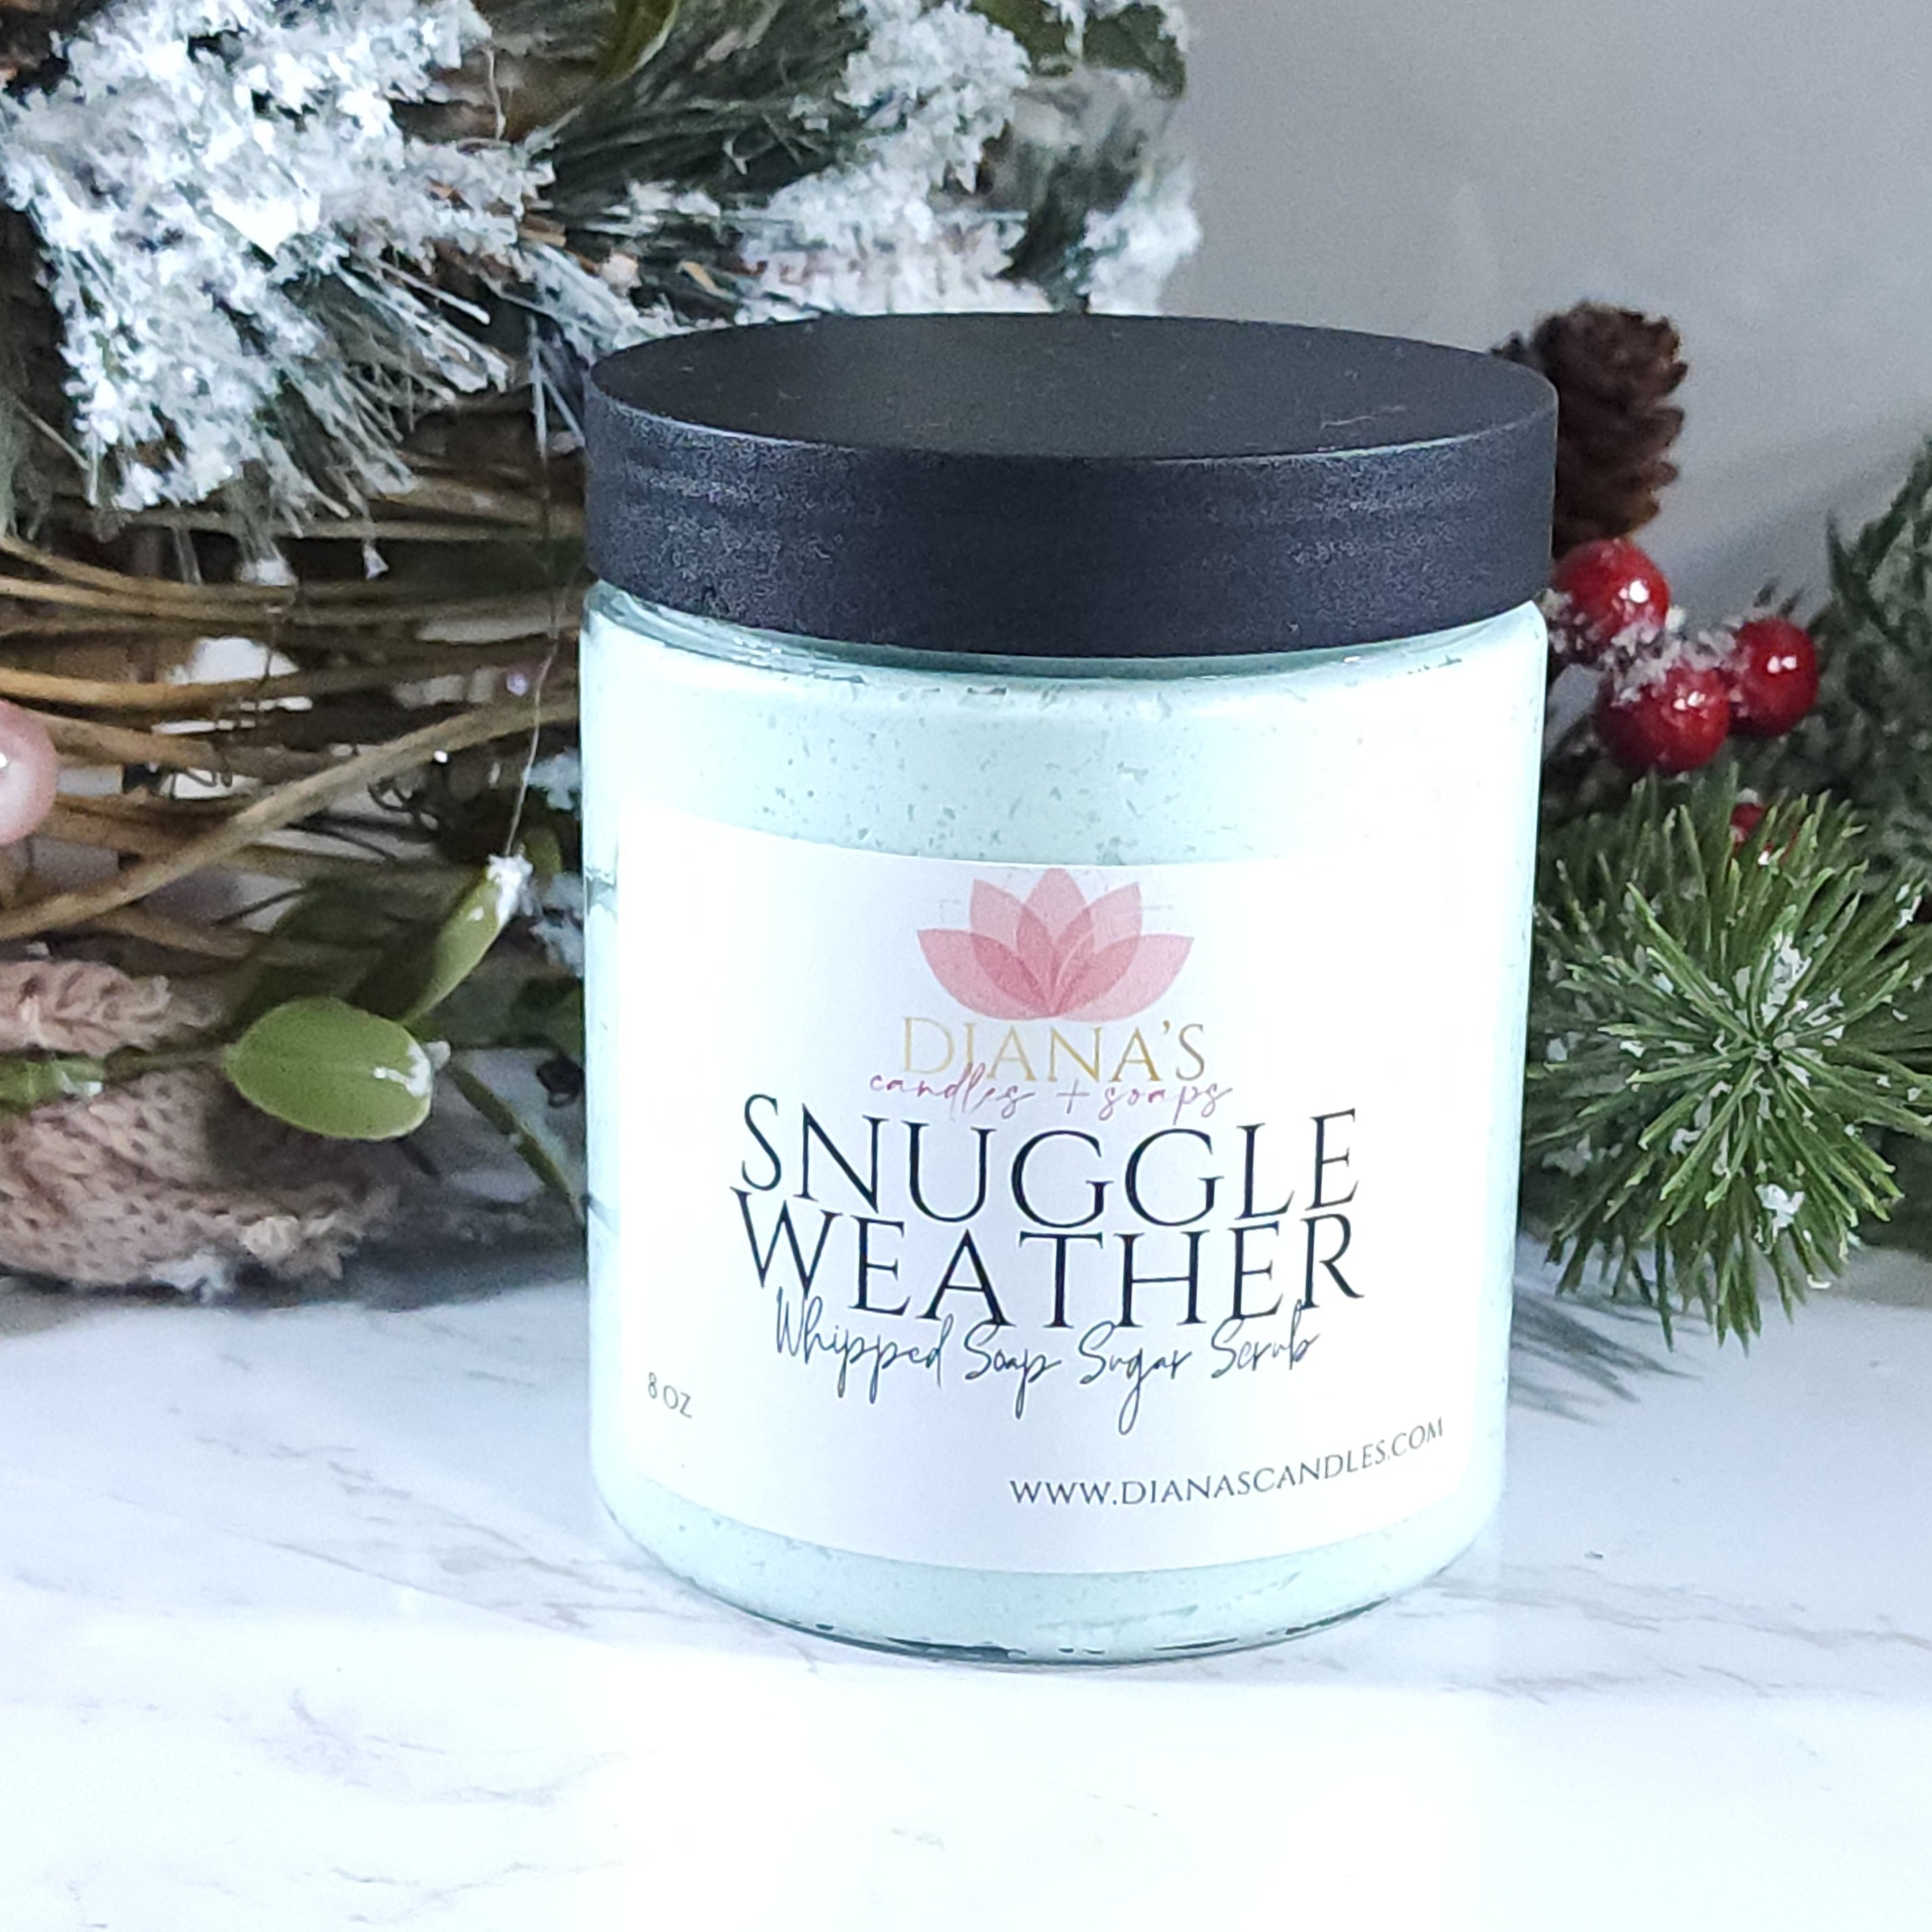 Snuggle Weather Whipped Soap Scrub Diana's Candles and Soaps